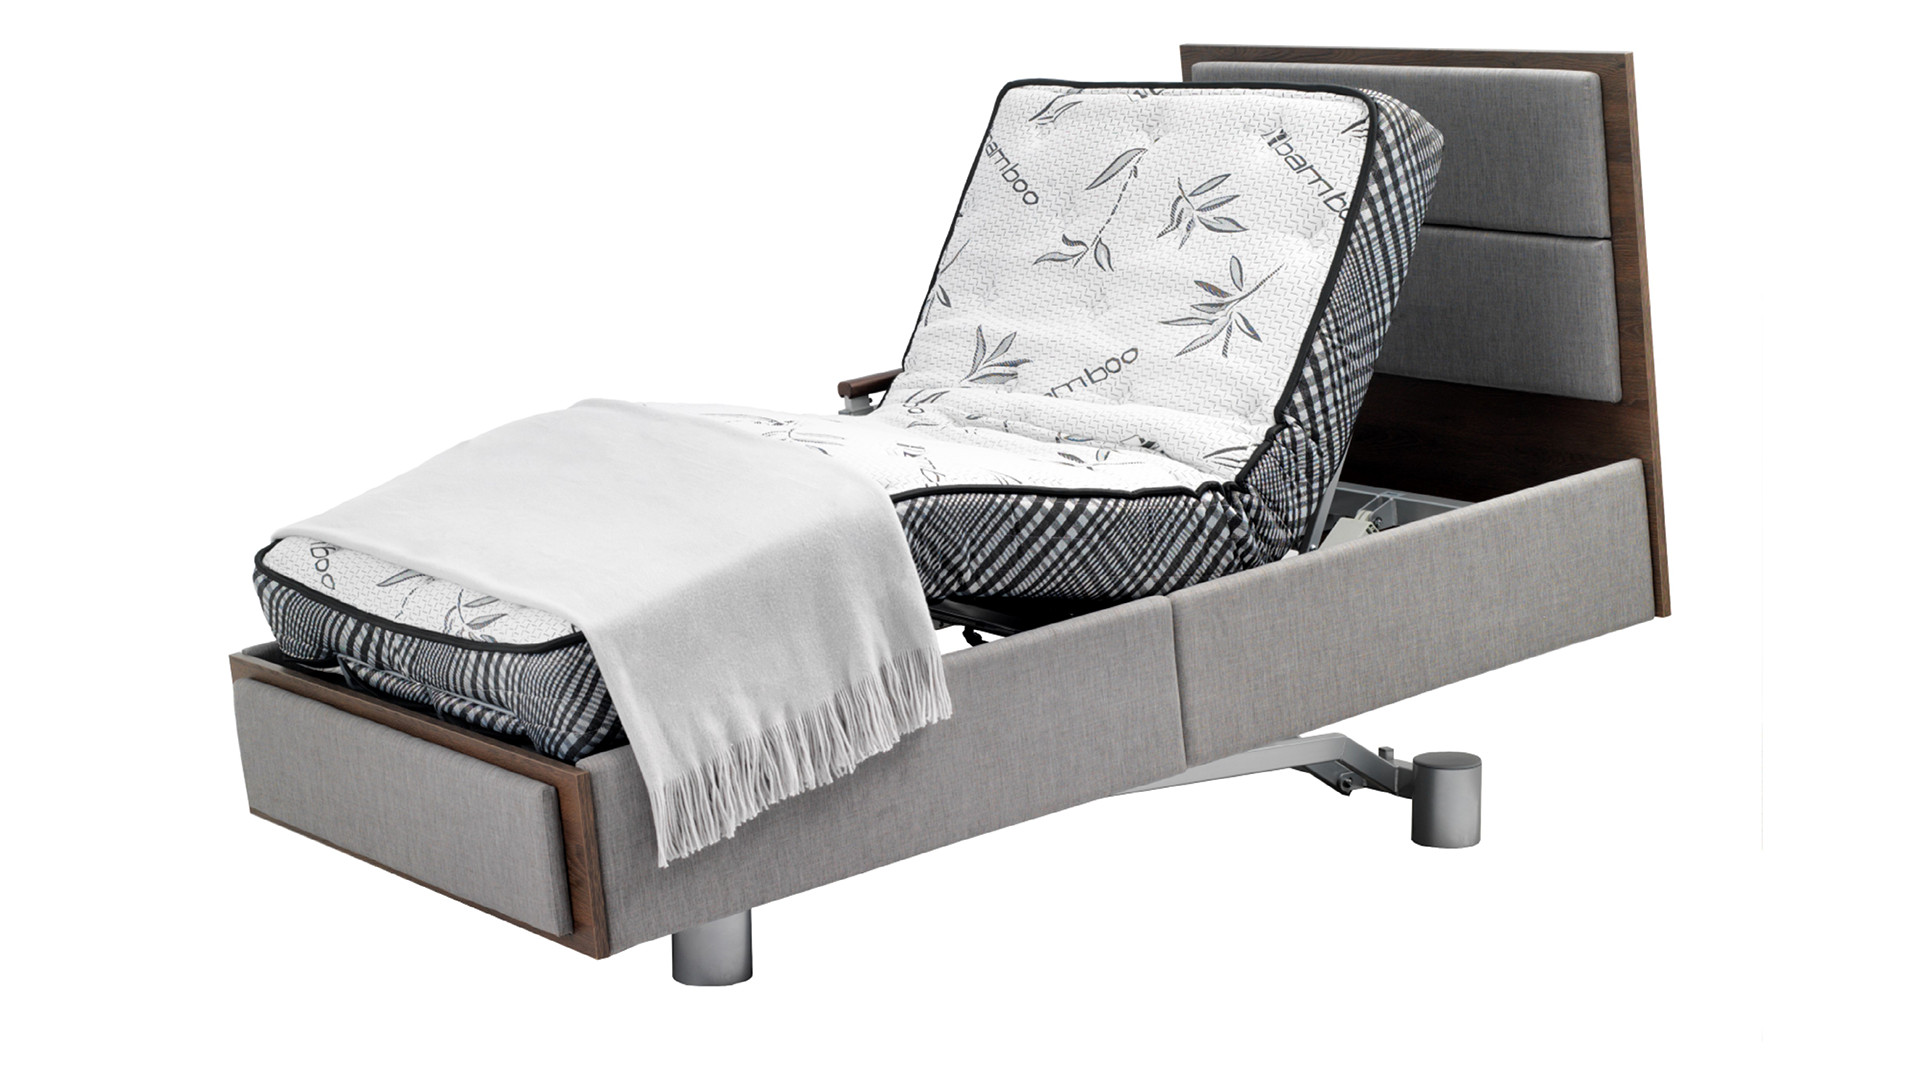 A modern adjustable bed with a floral patterned mattress, extended footrest, wooden side panels, and a draped gray blanket.